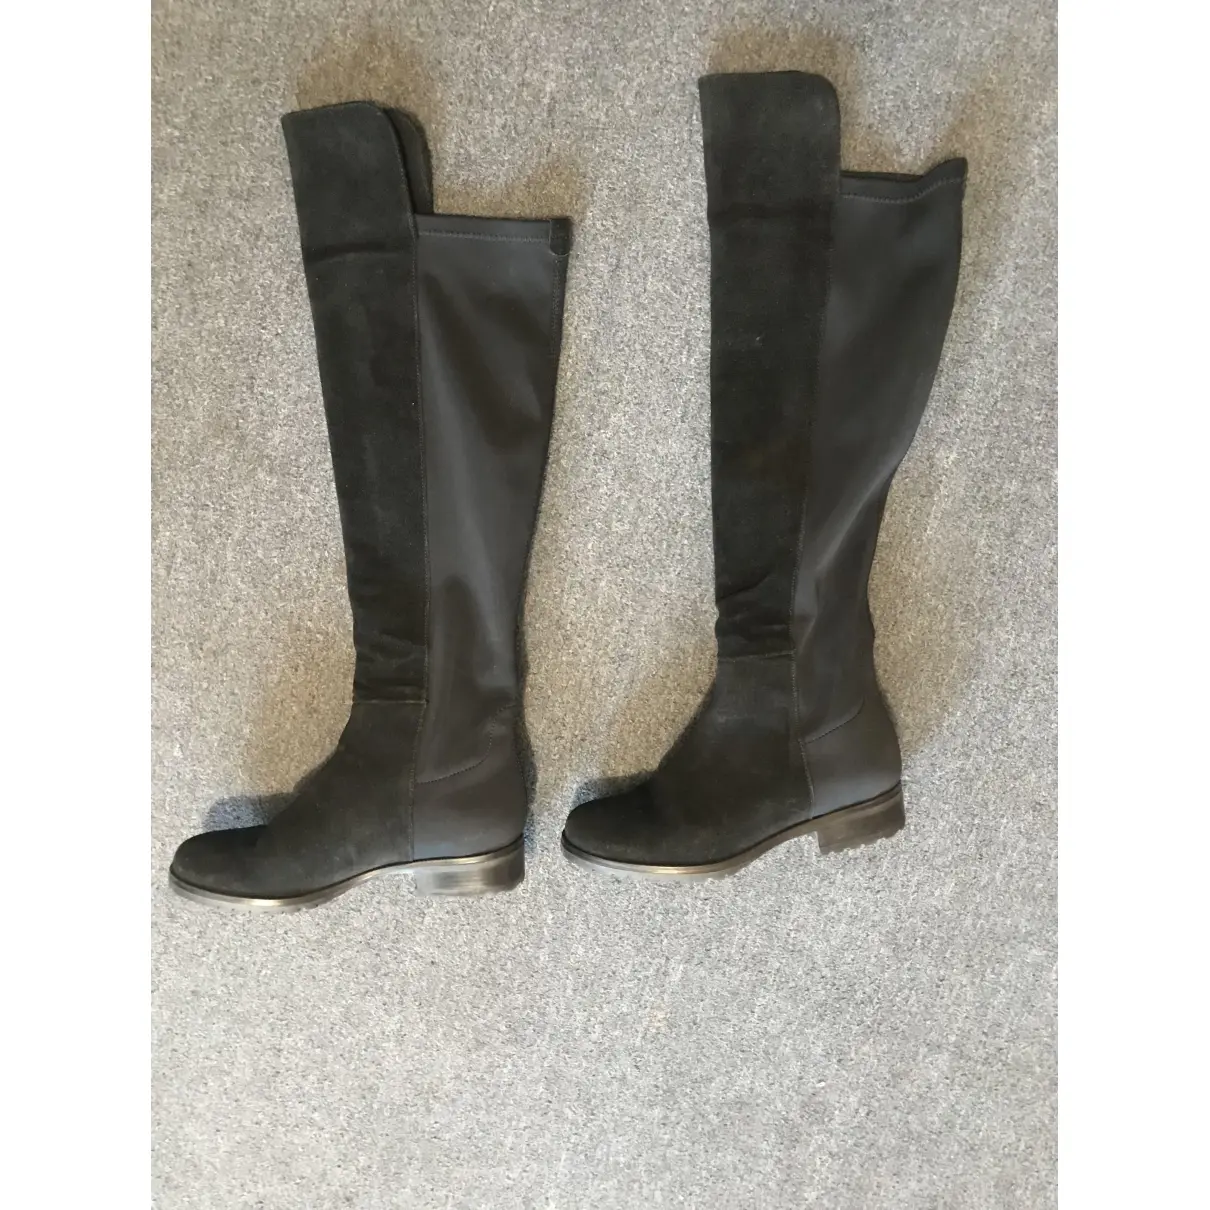 Dune Boots for sale